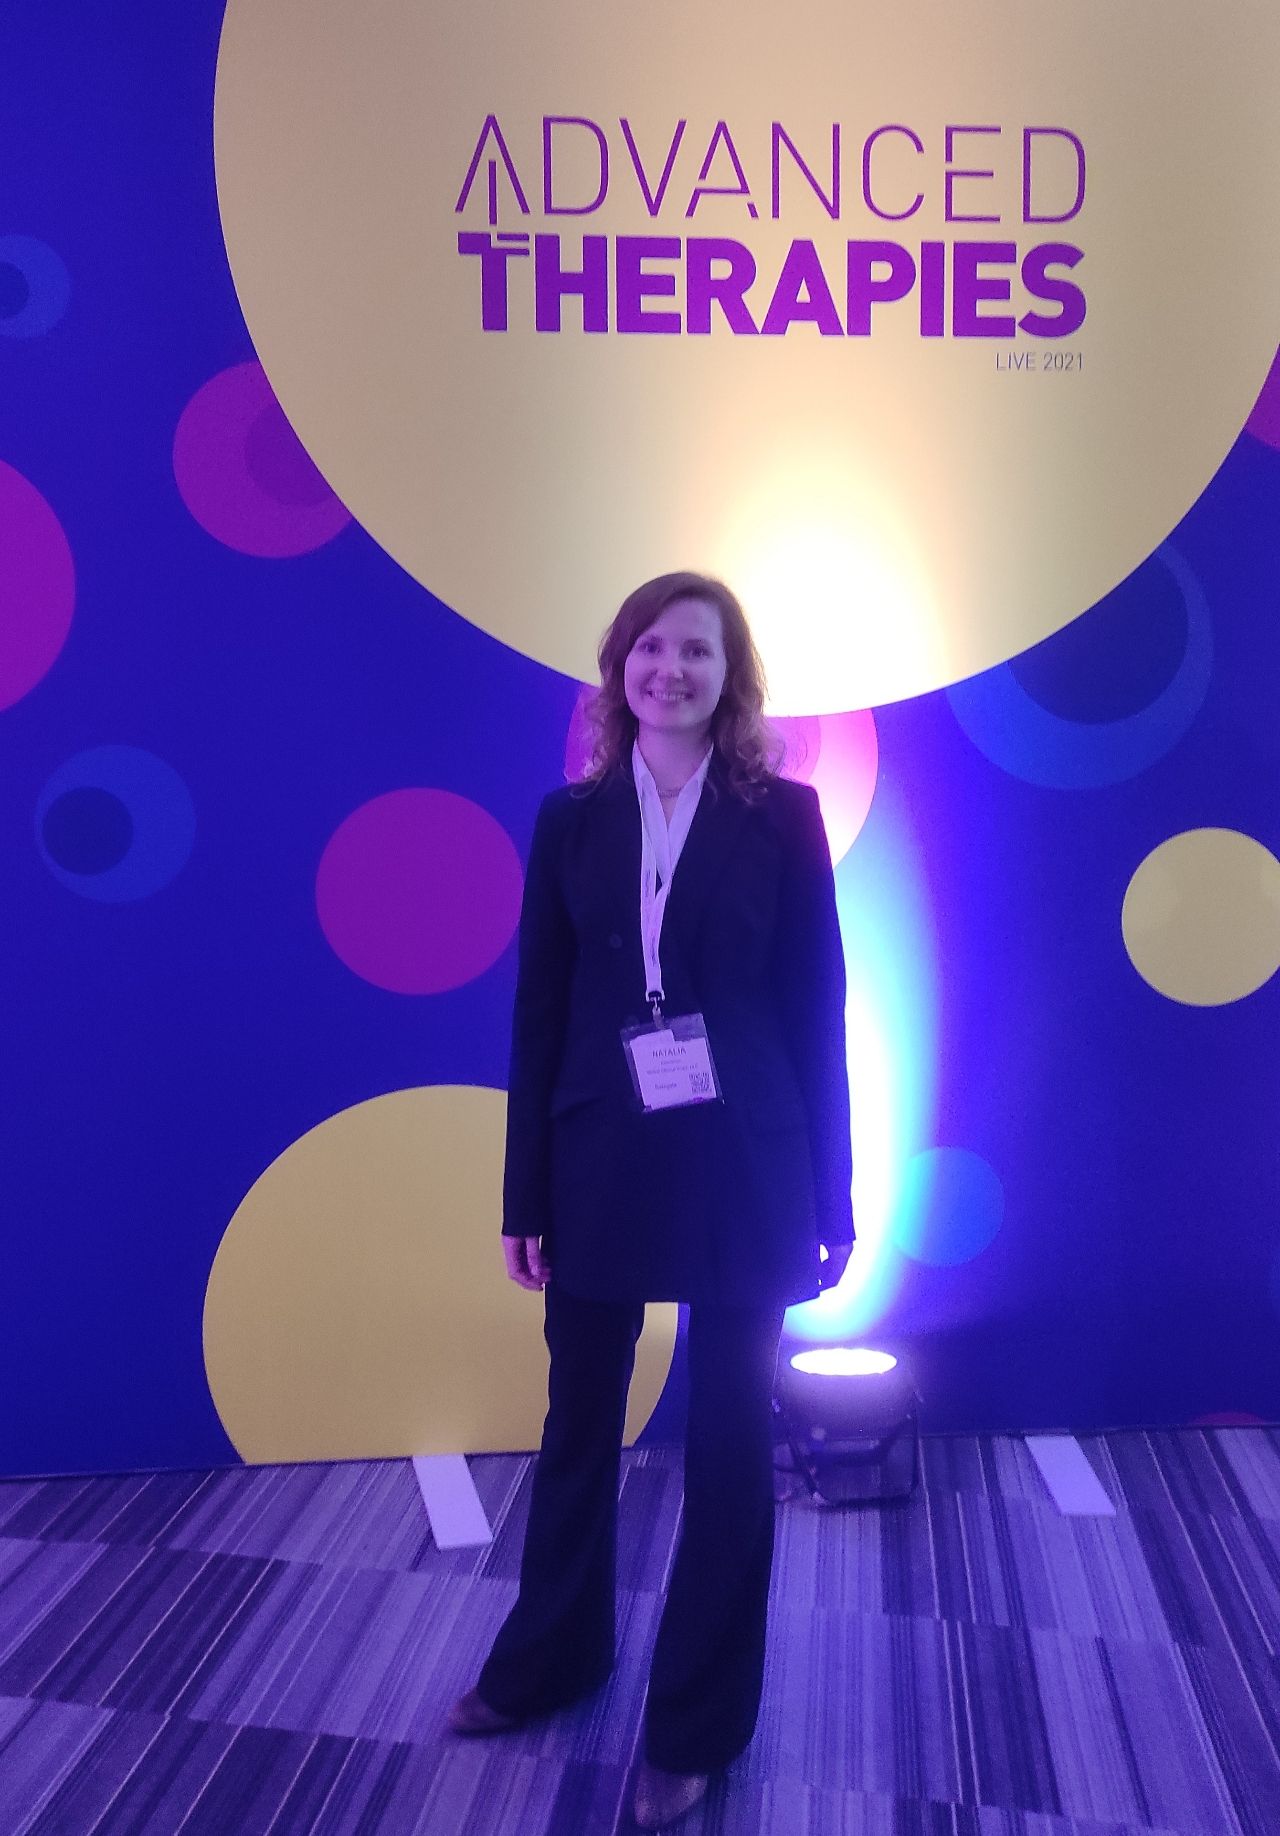 Natalia Katsnelson attended the Advanced Therapies congress in London